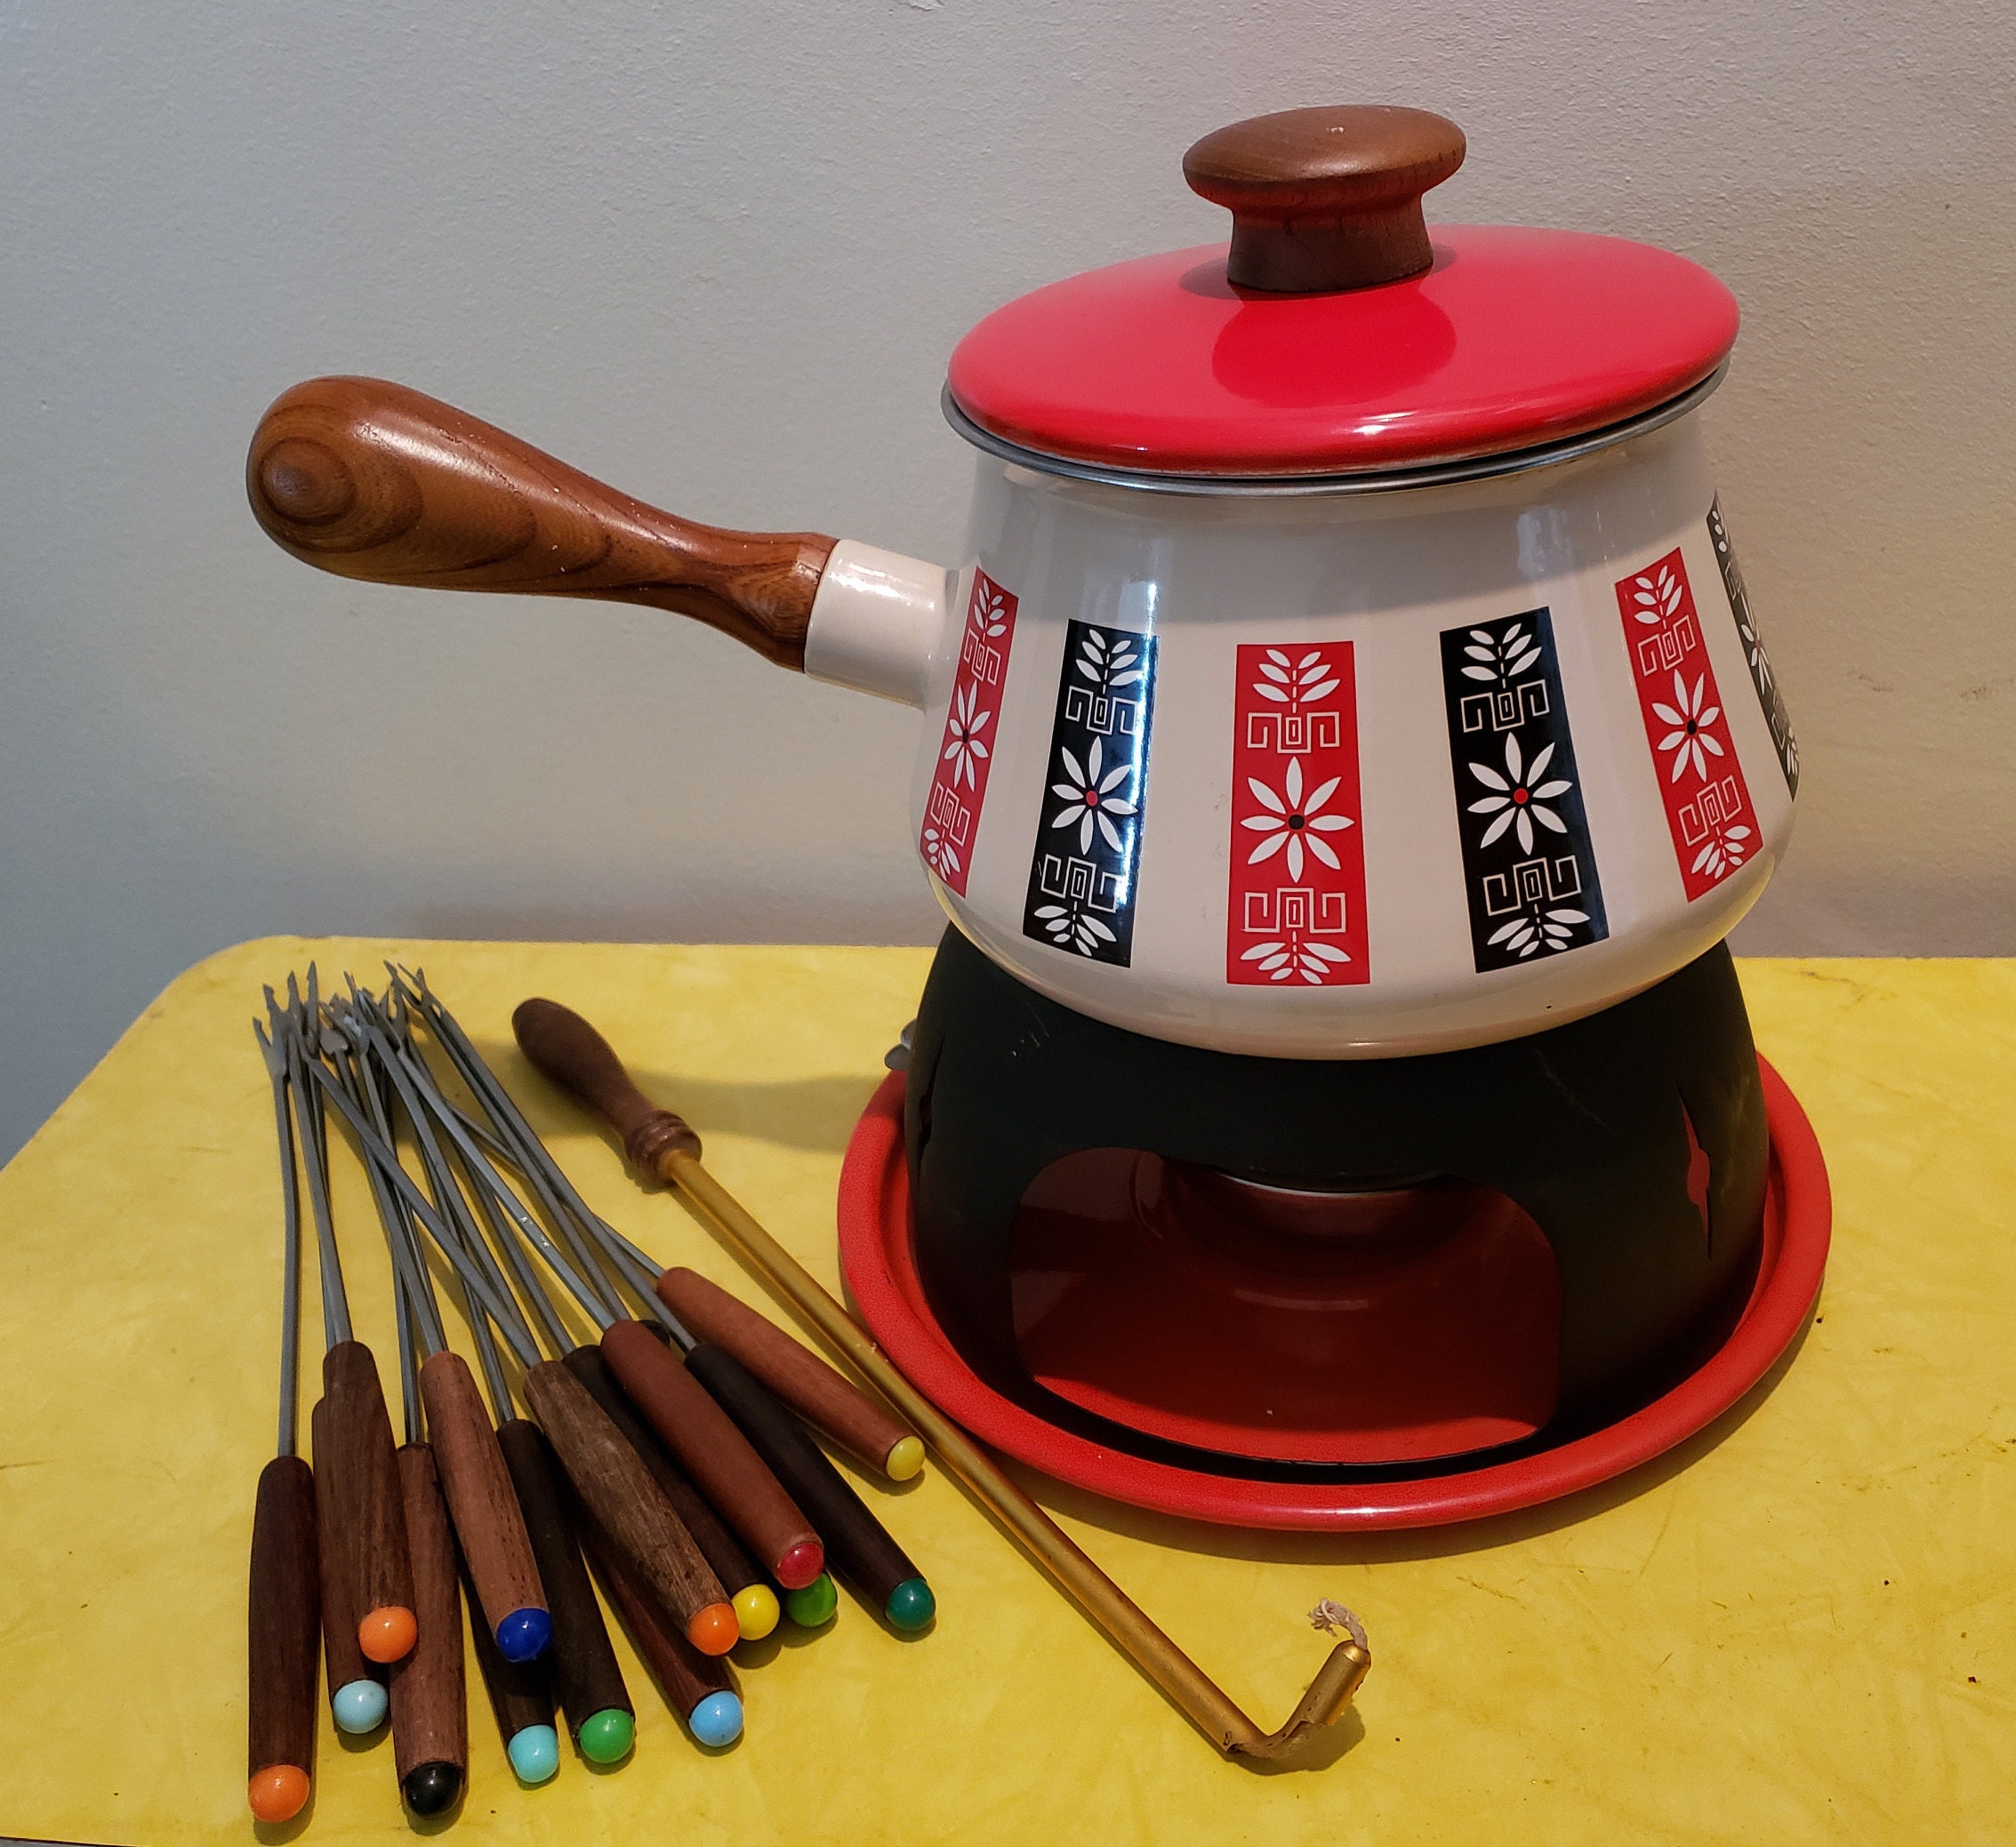 Lot # 424 - Vintage Oster Electric Fondue Pot with Lid in Harvest Gold  Retro with Fondue Forks and Original Box - Puget Sound Estate Auctions.com